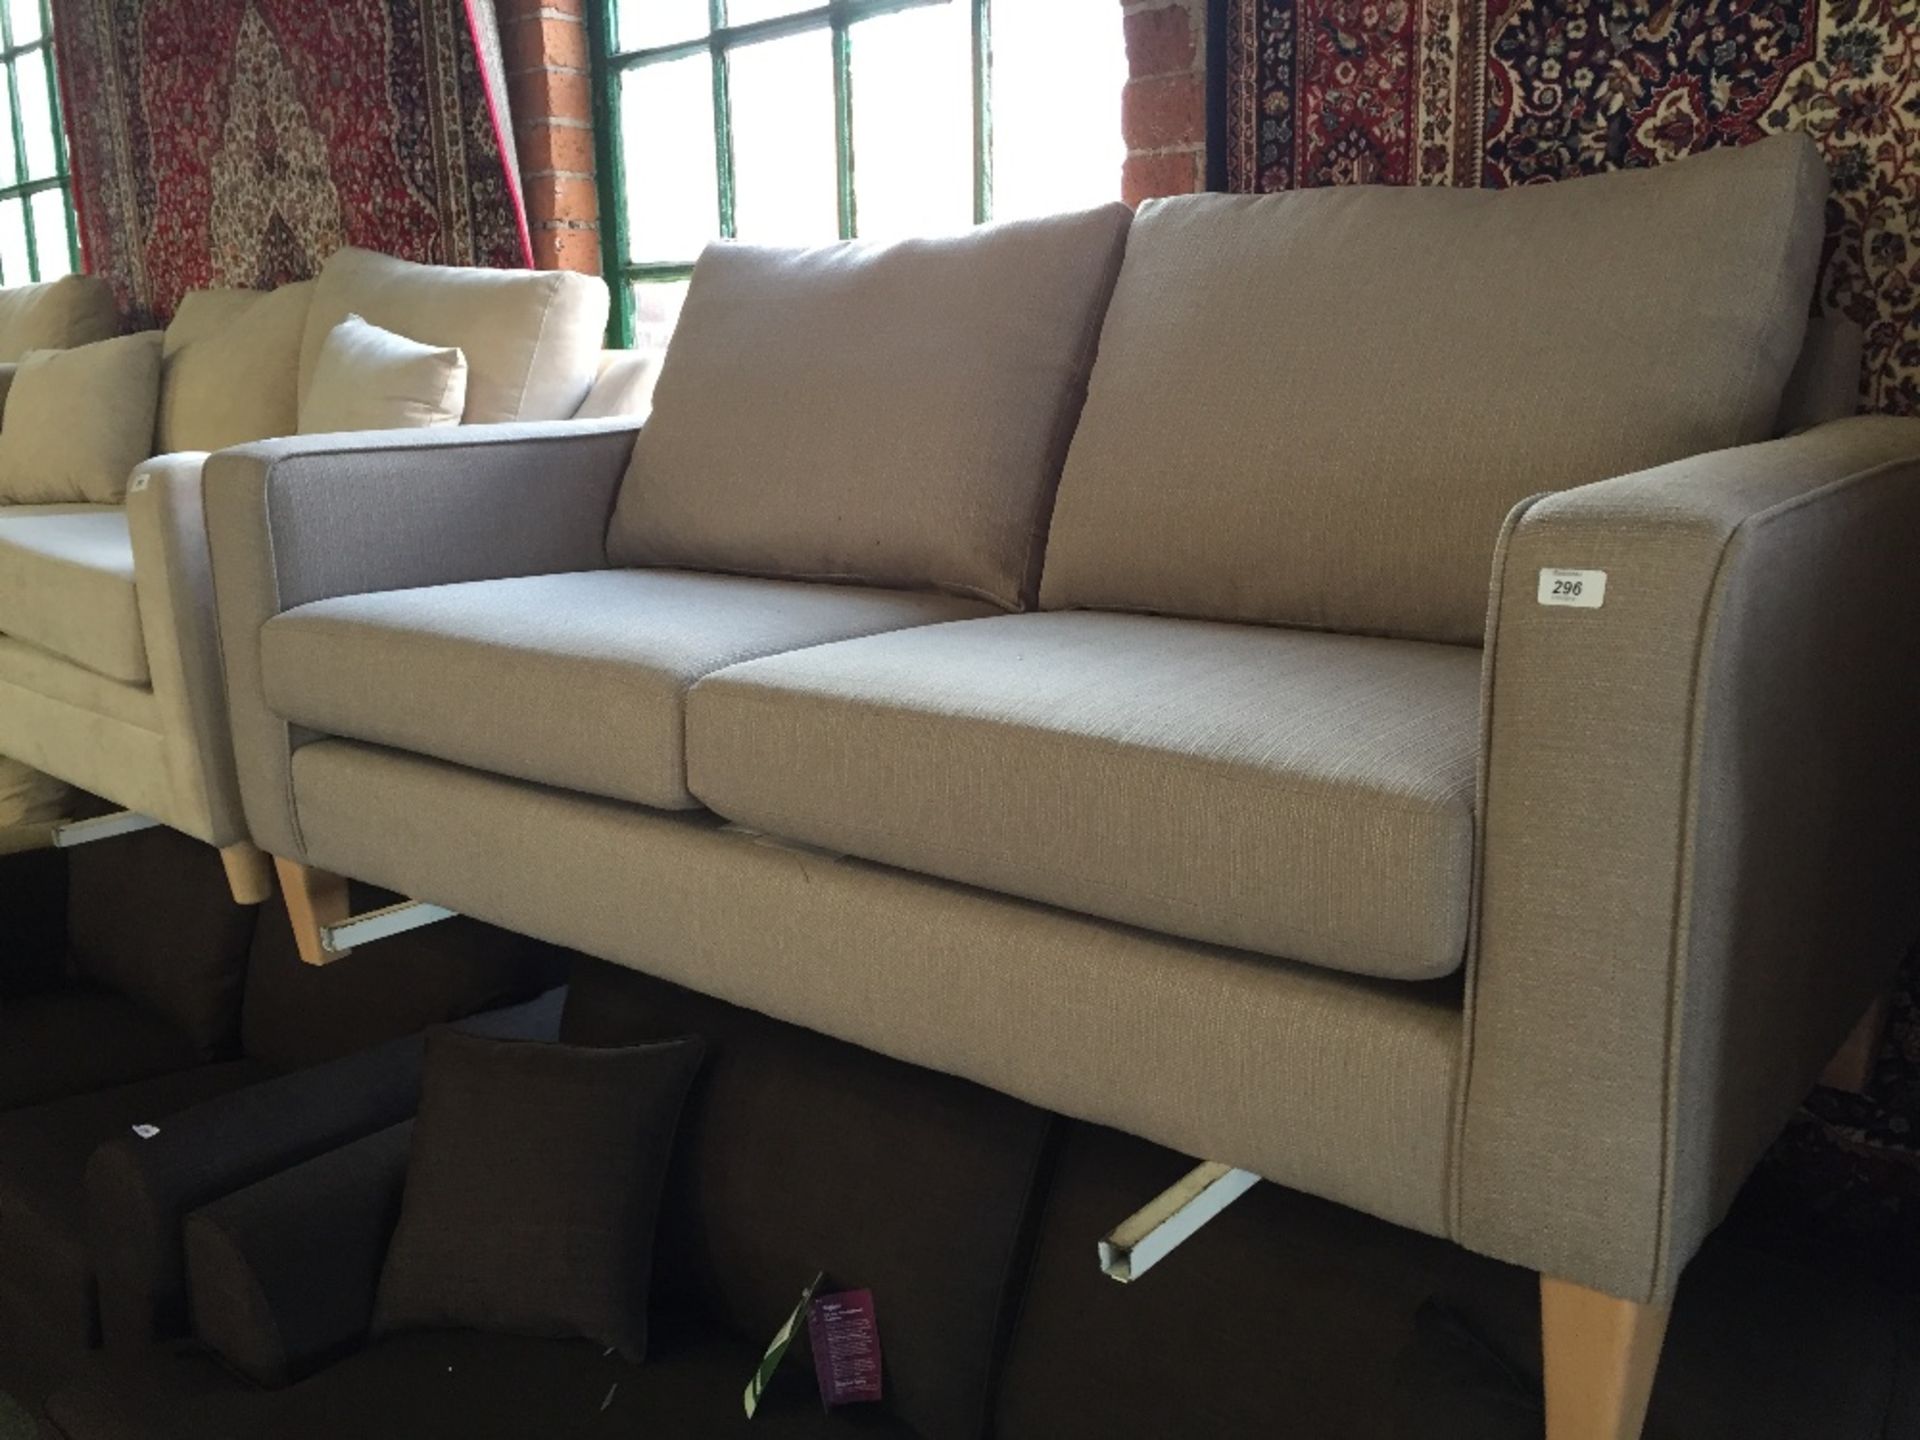 HARRISSON AOYSTER5 OYSTER 3 SEATER SOFA